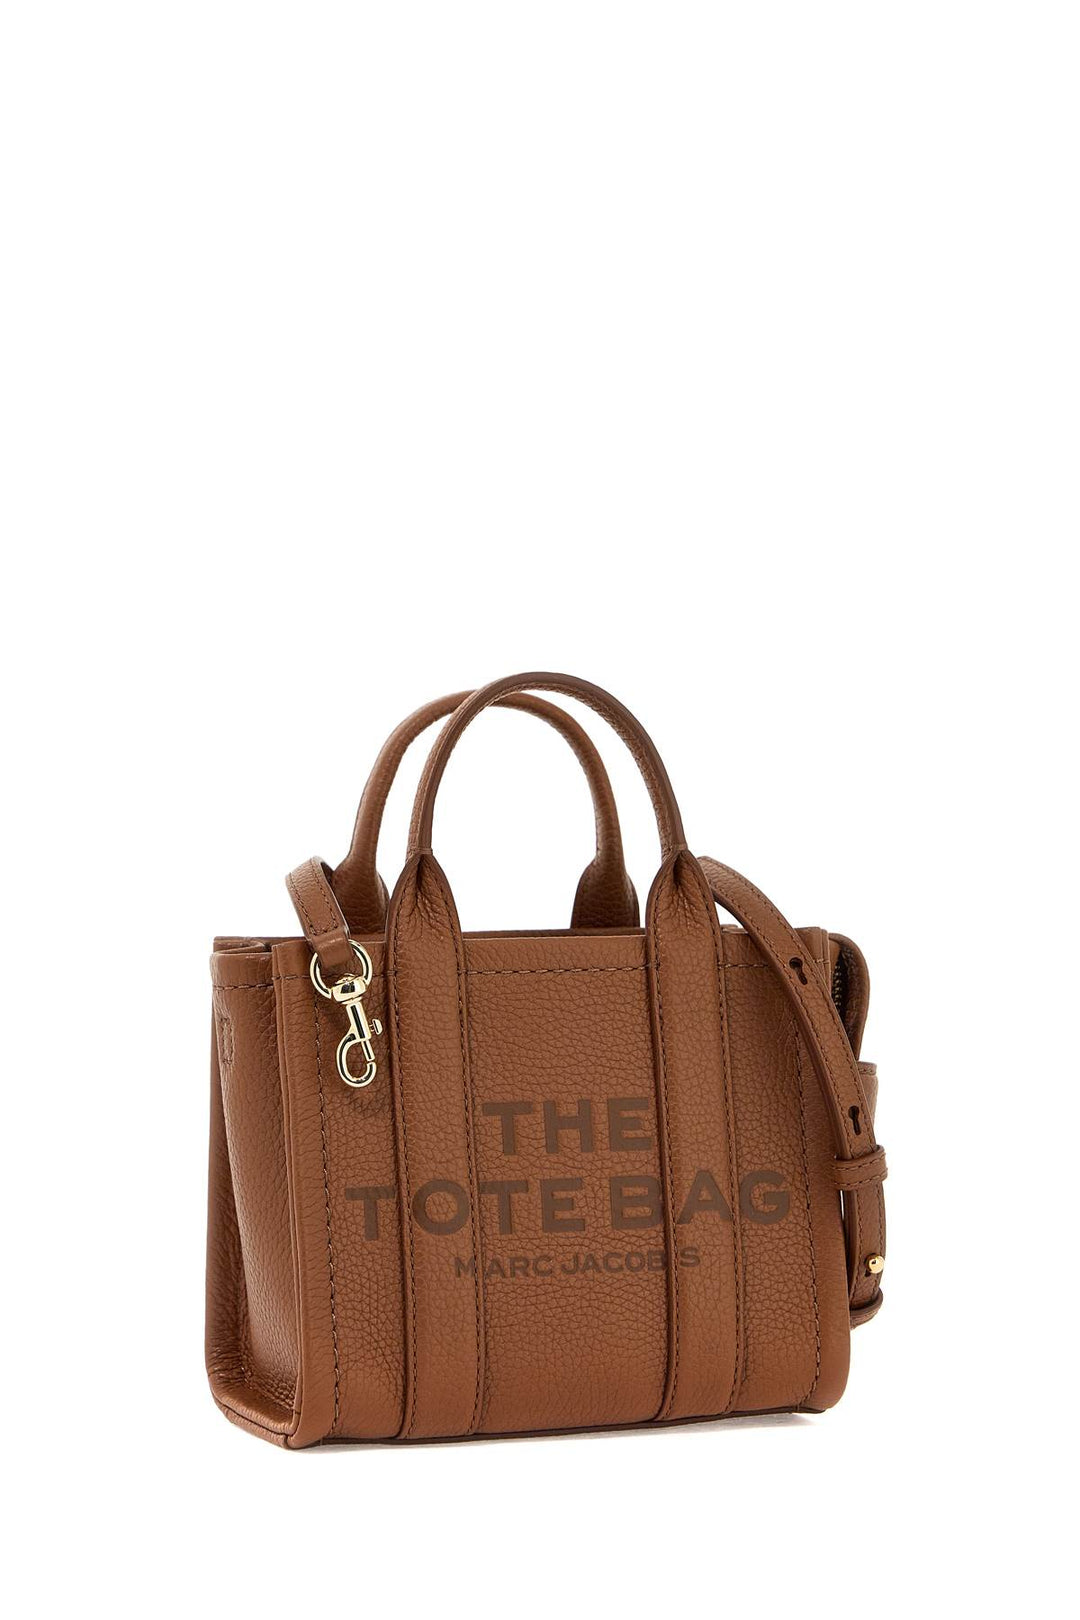 Marc Jacobs The Leather Mini Tote Bag   Brown